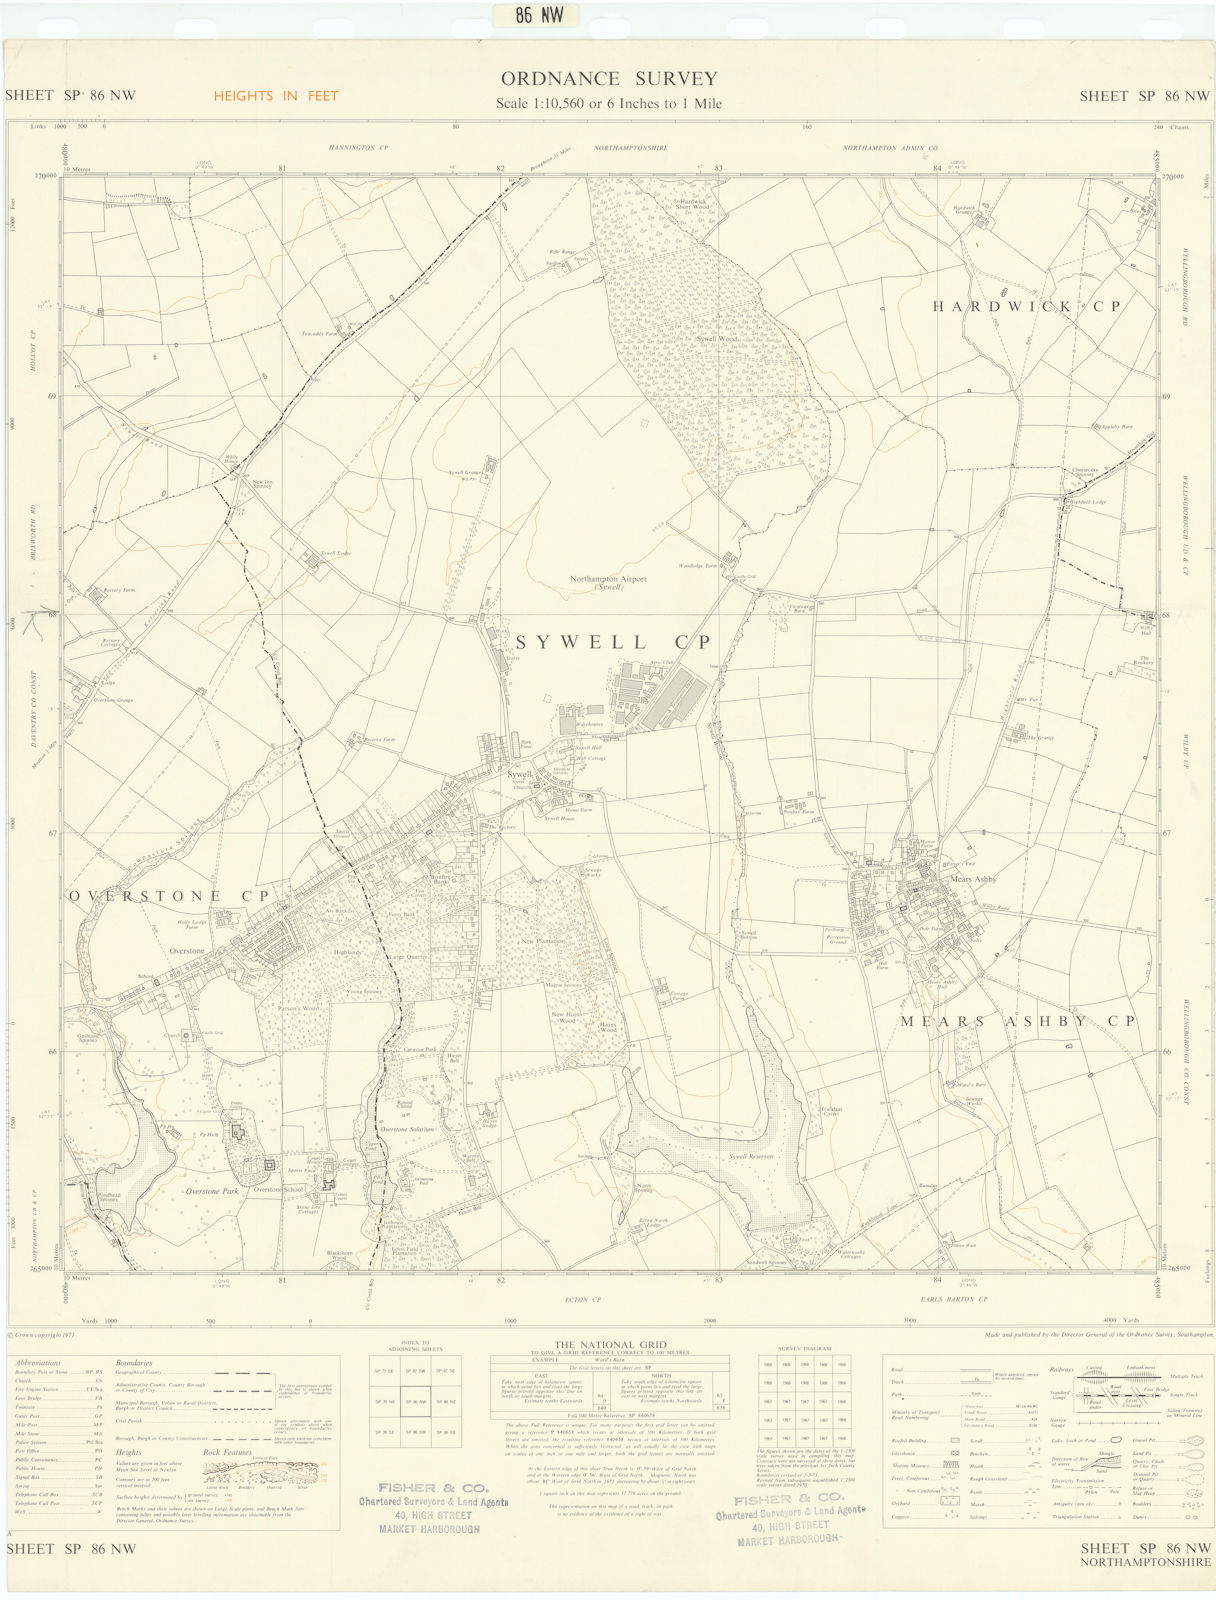 Ordnance Survey SP86NW Northamptonshire Sywell Overstone Mears Ashby 1971 map